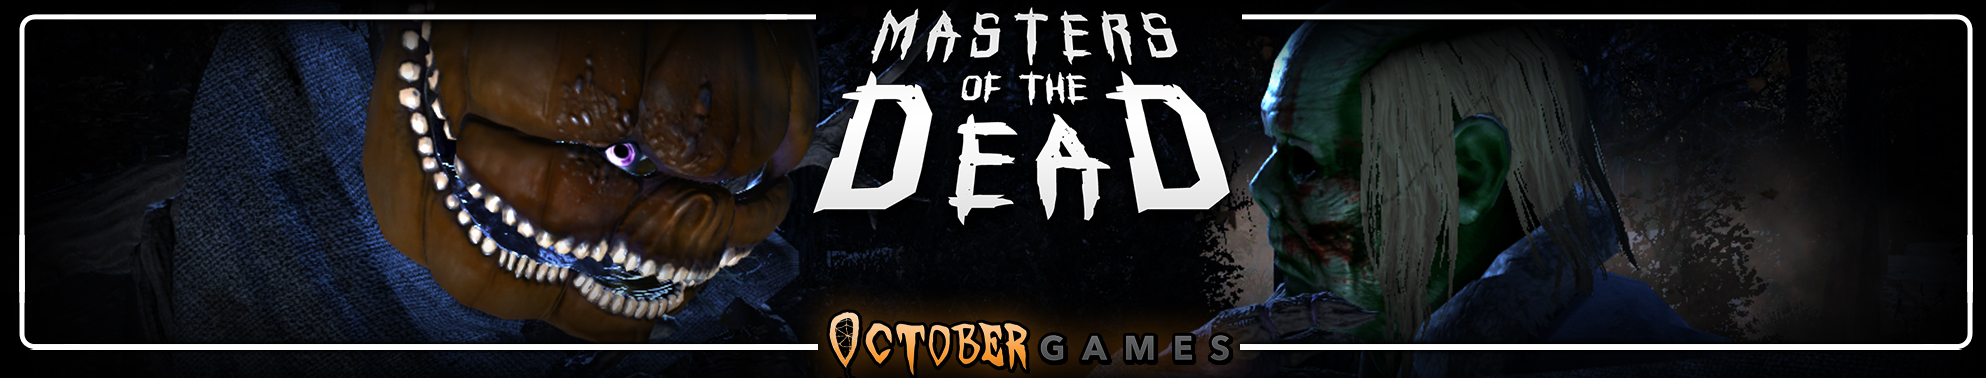 Masters of the Dead - Demo